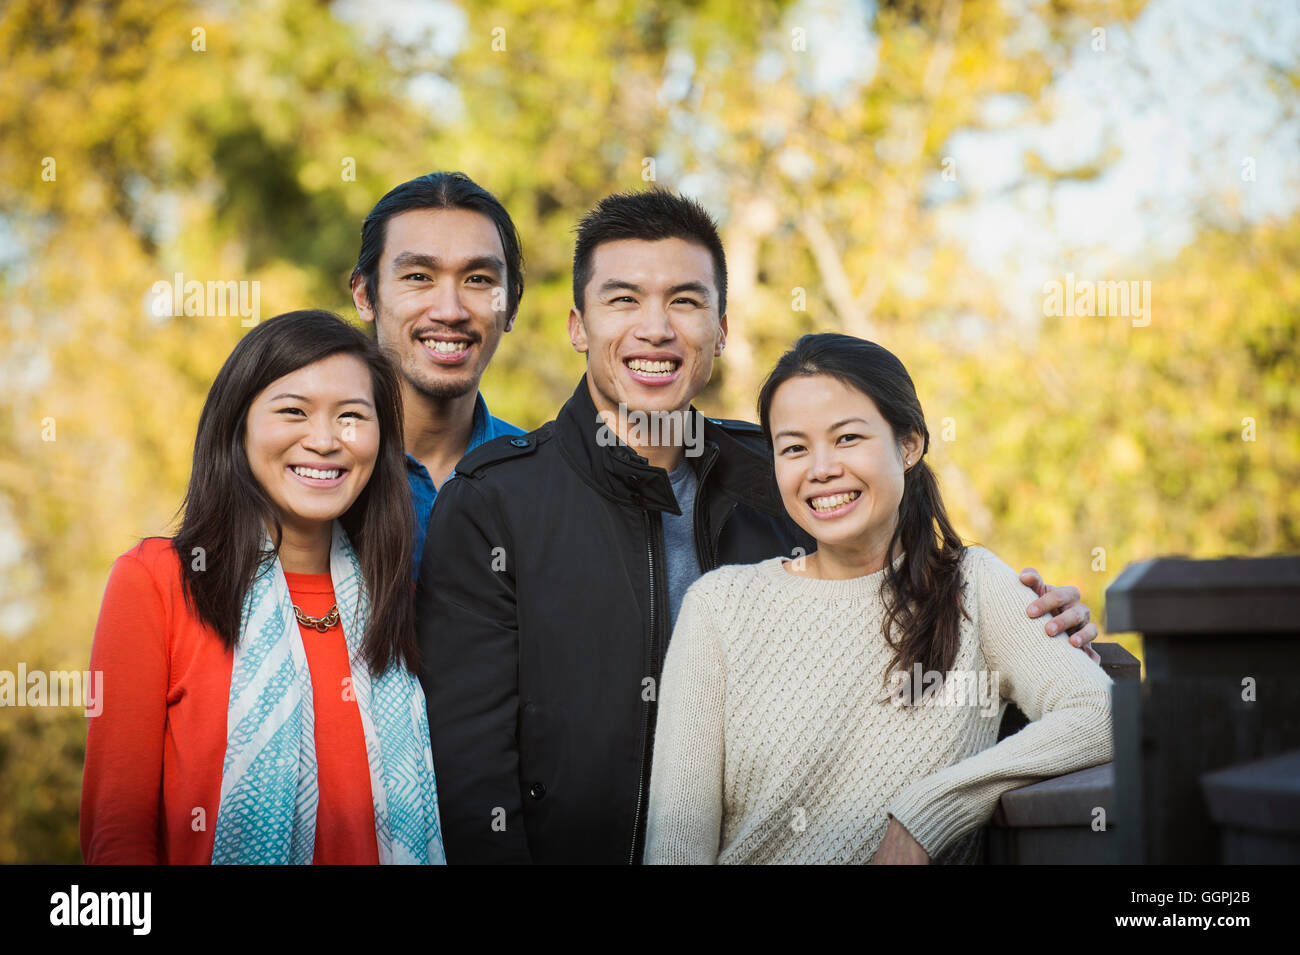 Adult Chinese siblings smiling outdoors Stock Photo